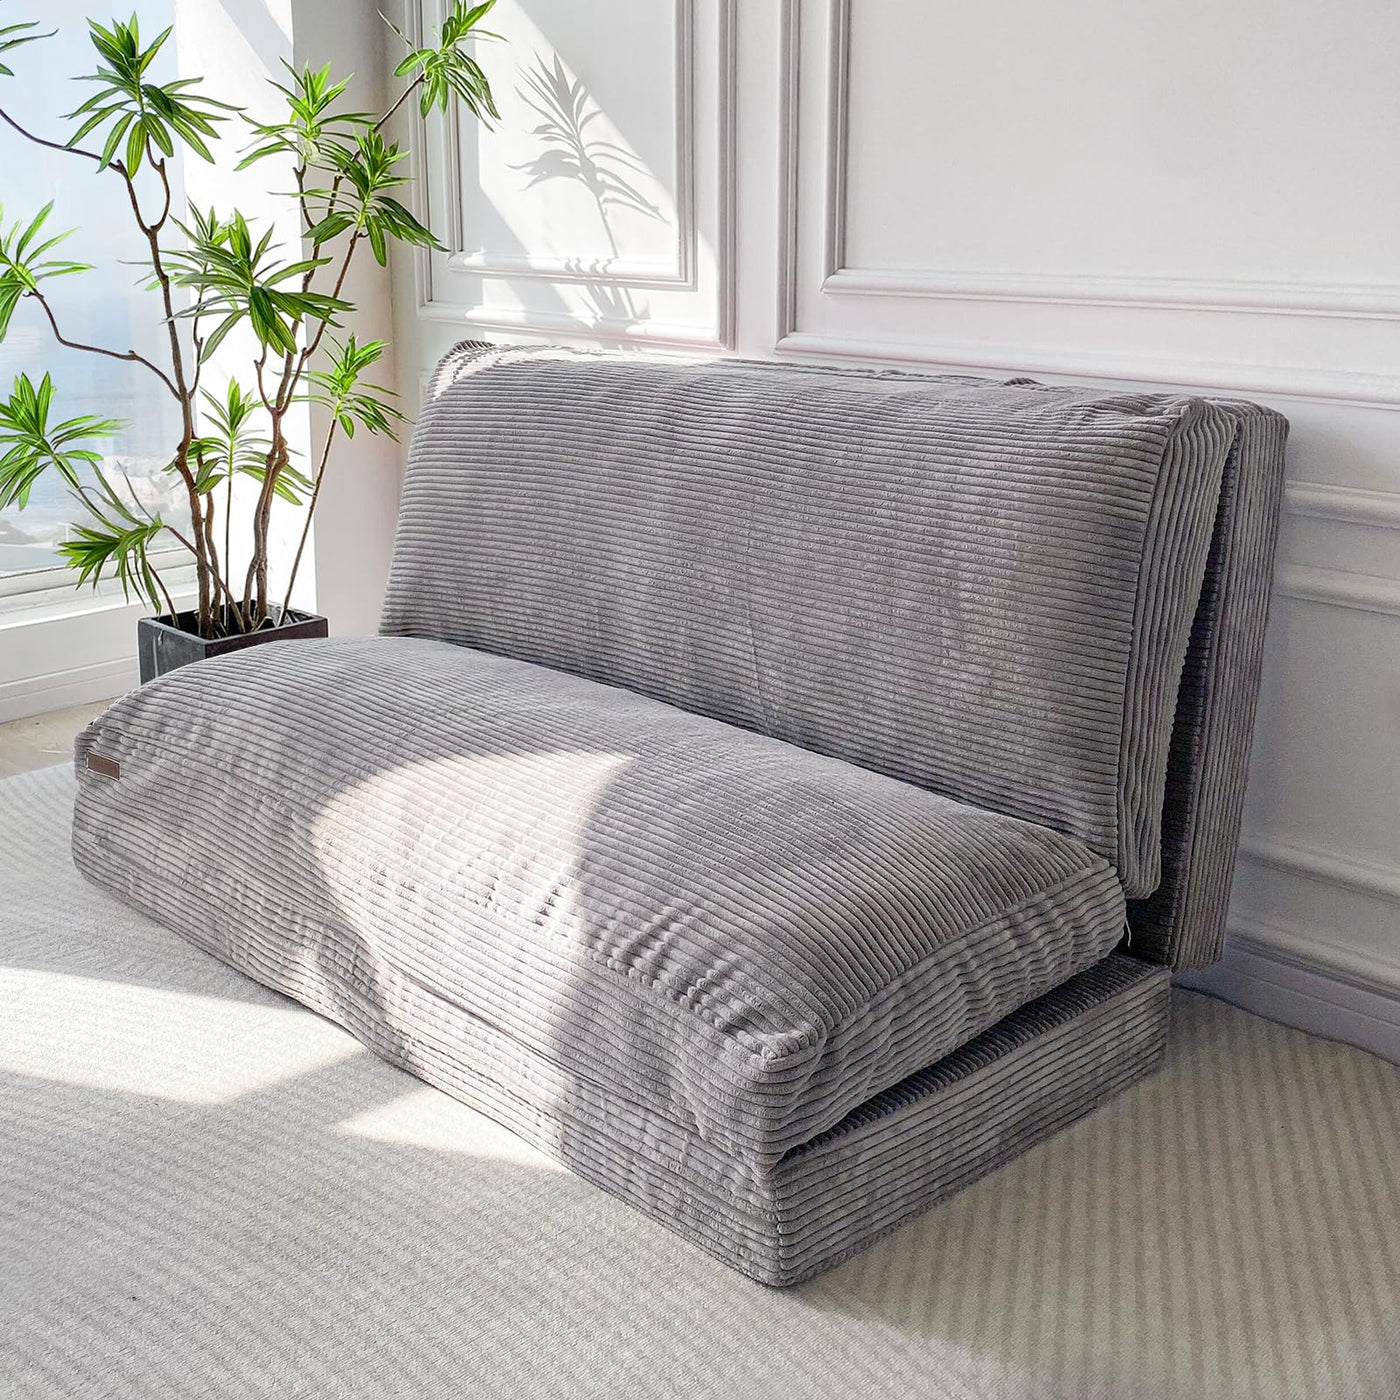 MAXYOYO Bean Bag Folding Sofa Bed with Corduroy Washable Cover, Extra Thick and Long Floor Sofa for Adults, Grey